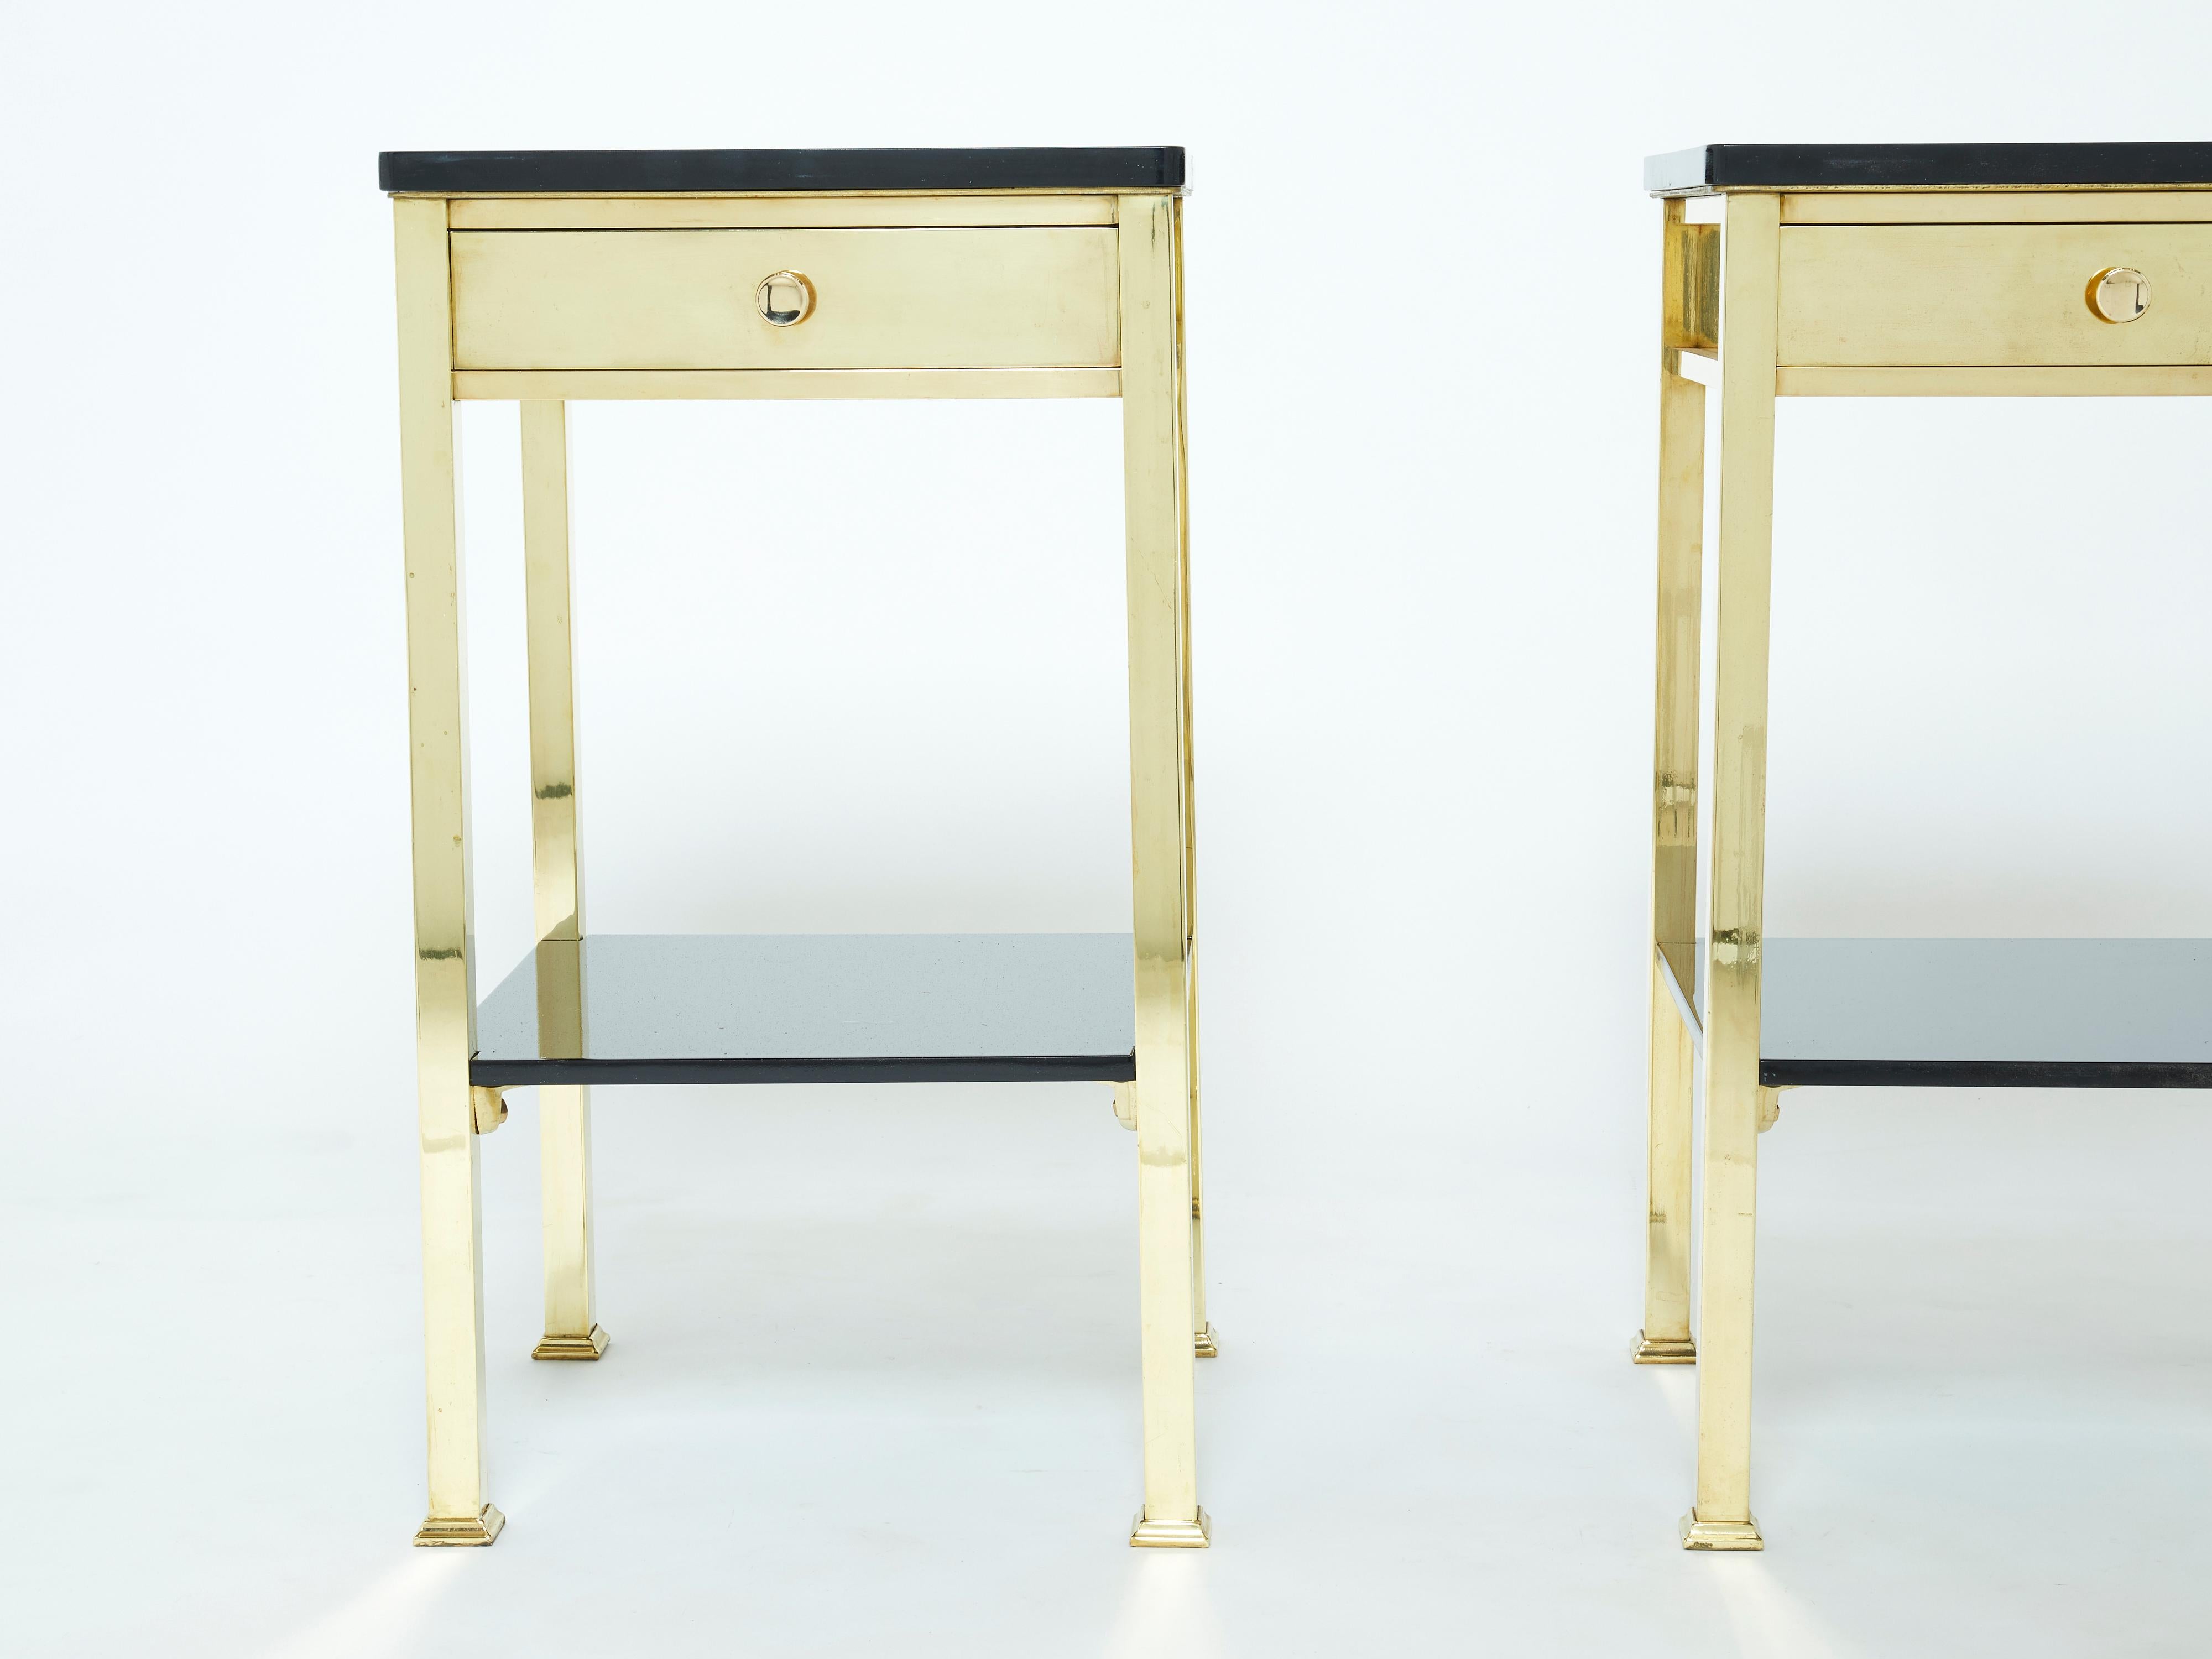 This beautiful pair of night stands or end tables were produced in France in the early 1960s. They are heavy and really quality made, with solid brass everywhere from the feet to the drawers and handles, topped with two tier black lacquered tops and